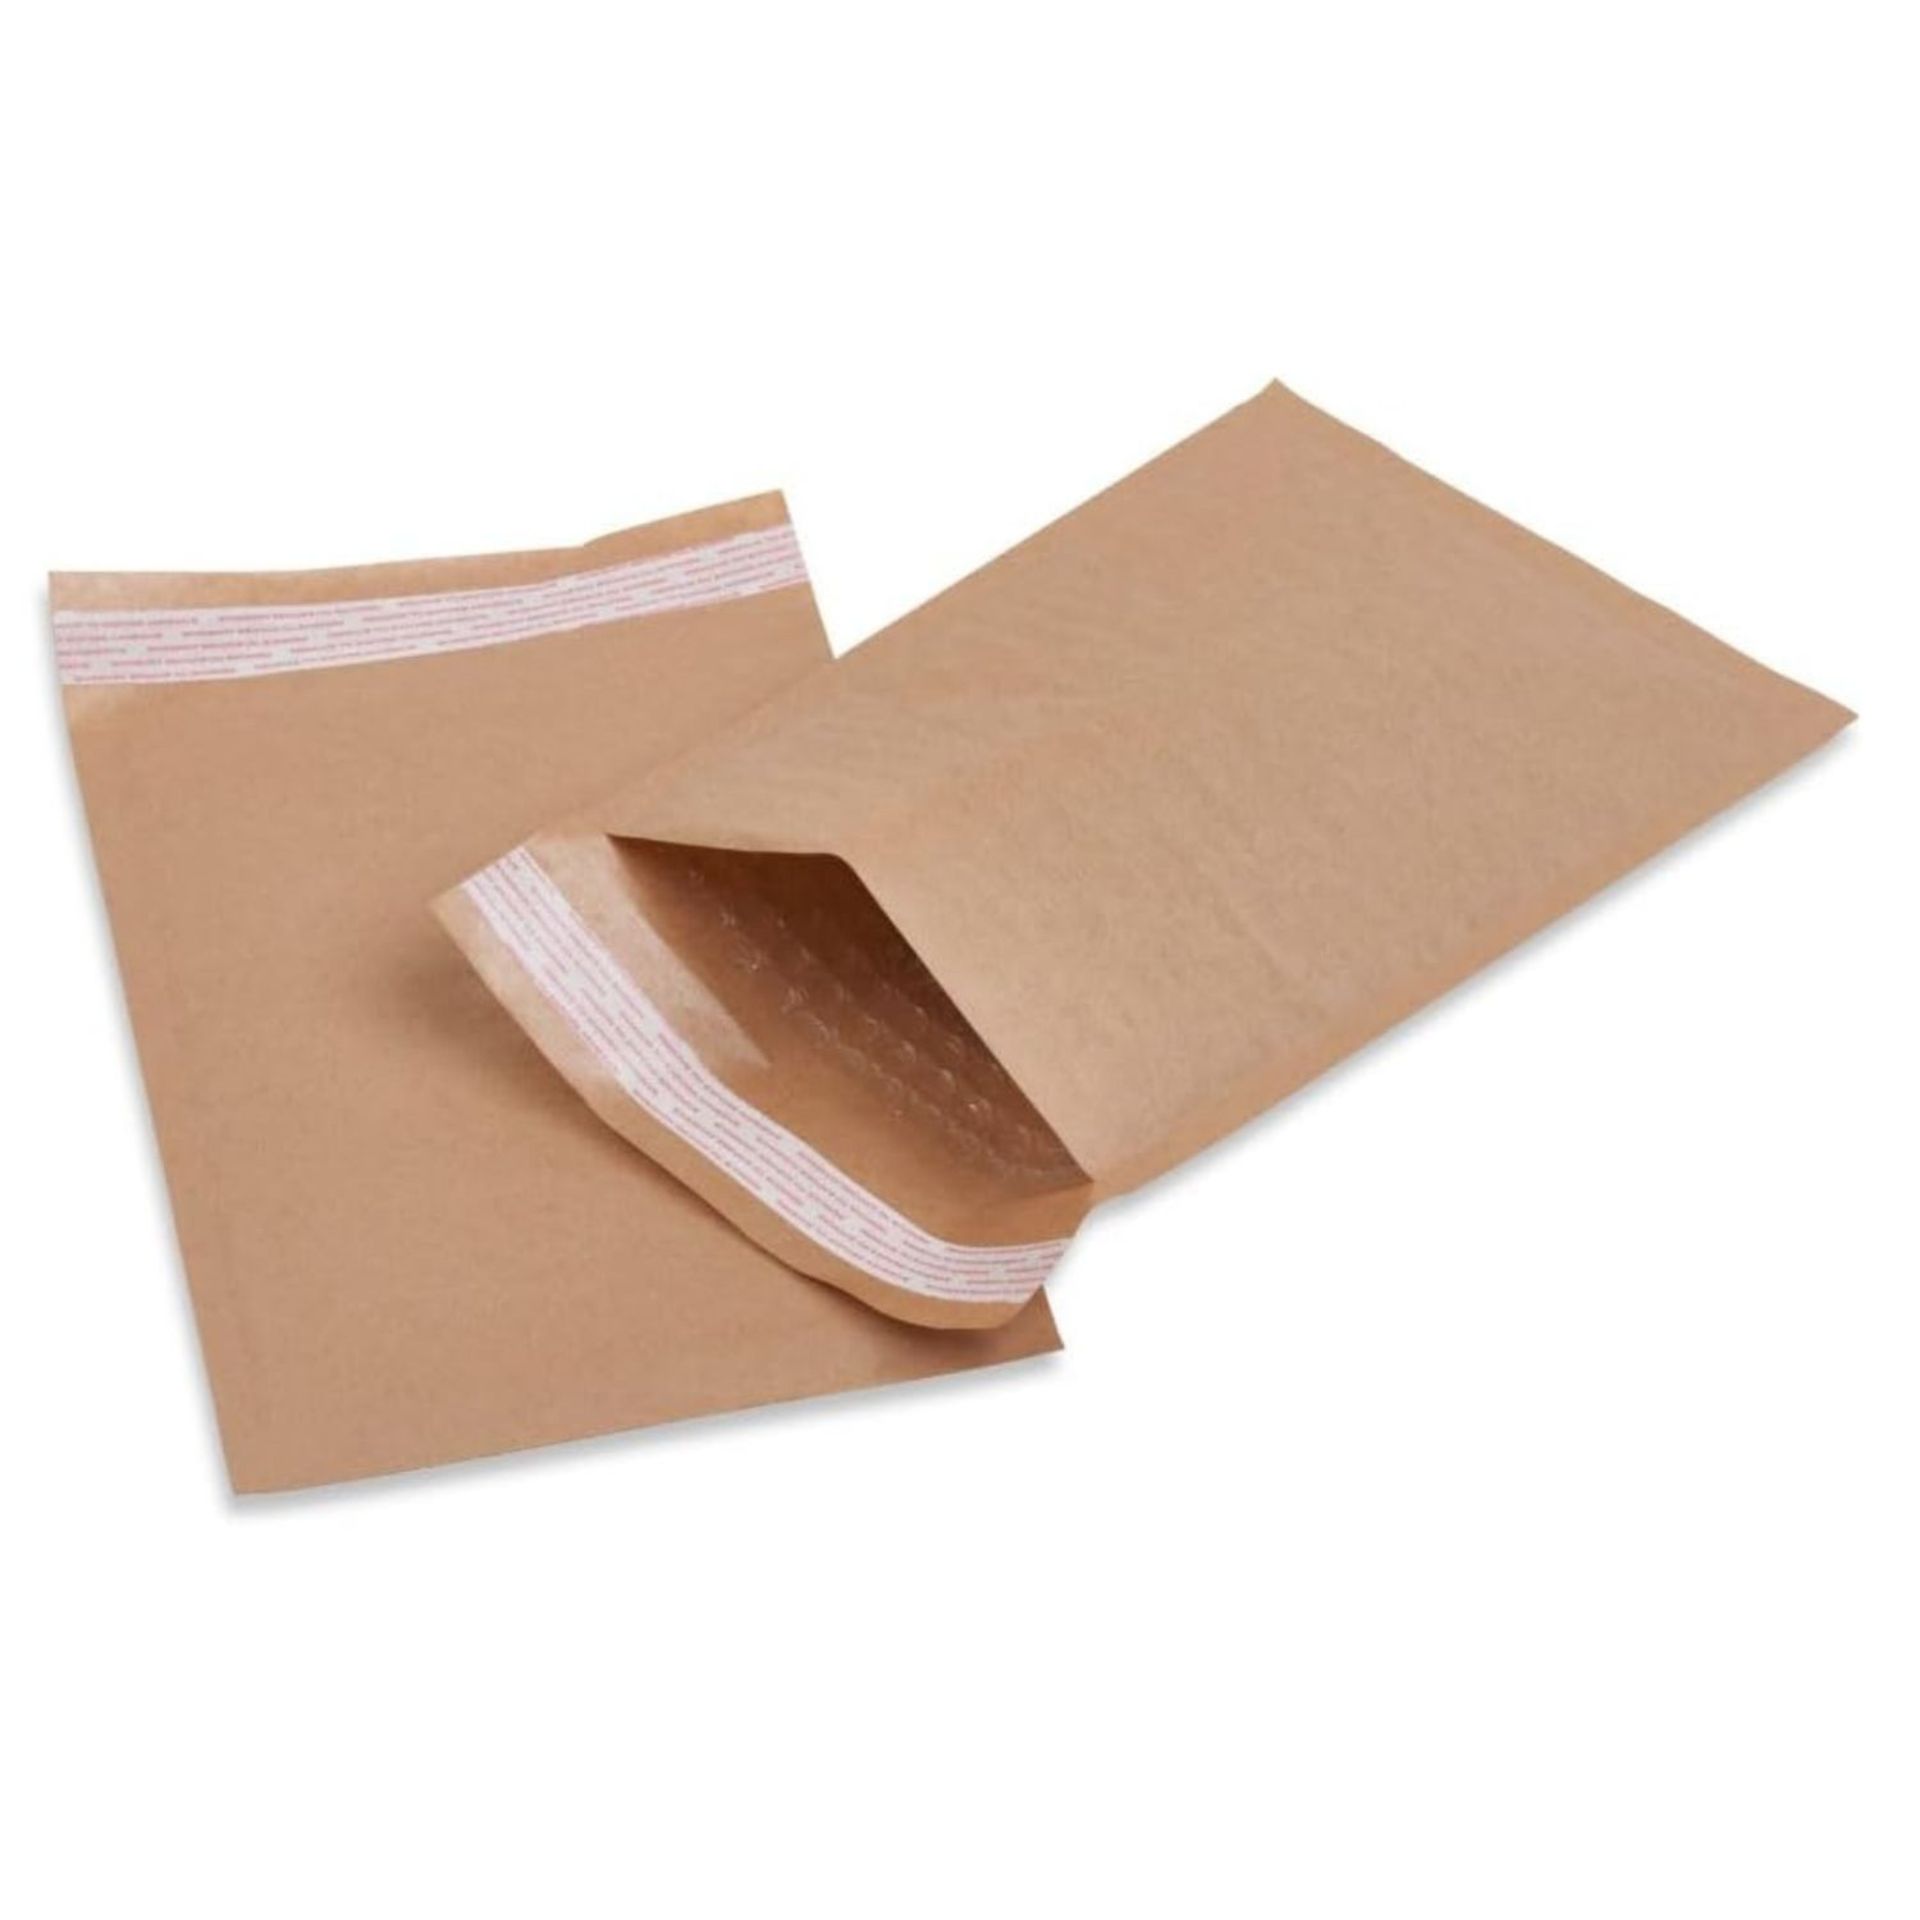 10 BOXES OF PAPER BAG ENVELOPES BUBBLE BAGS 100 PACK PEEL AND SEAL TOUGH LIGHT PADDED (120 X 165MM) - Image 3 of 4